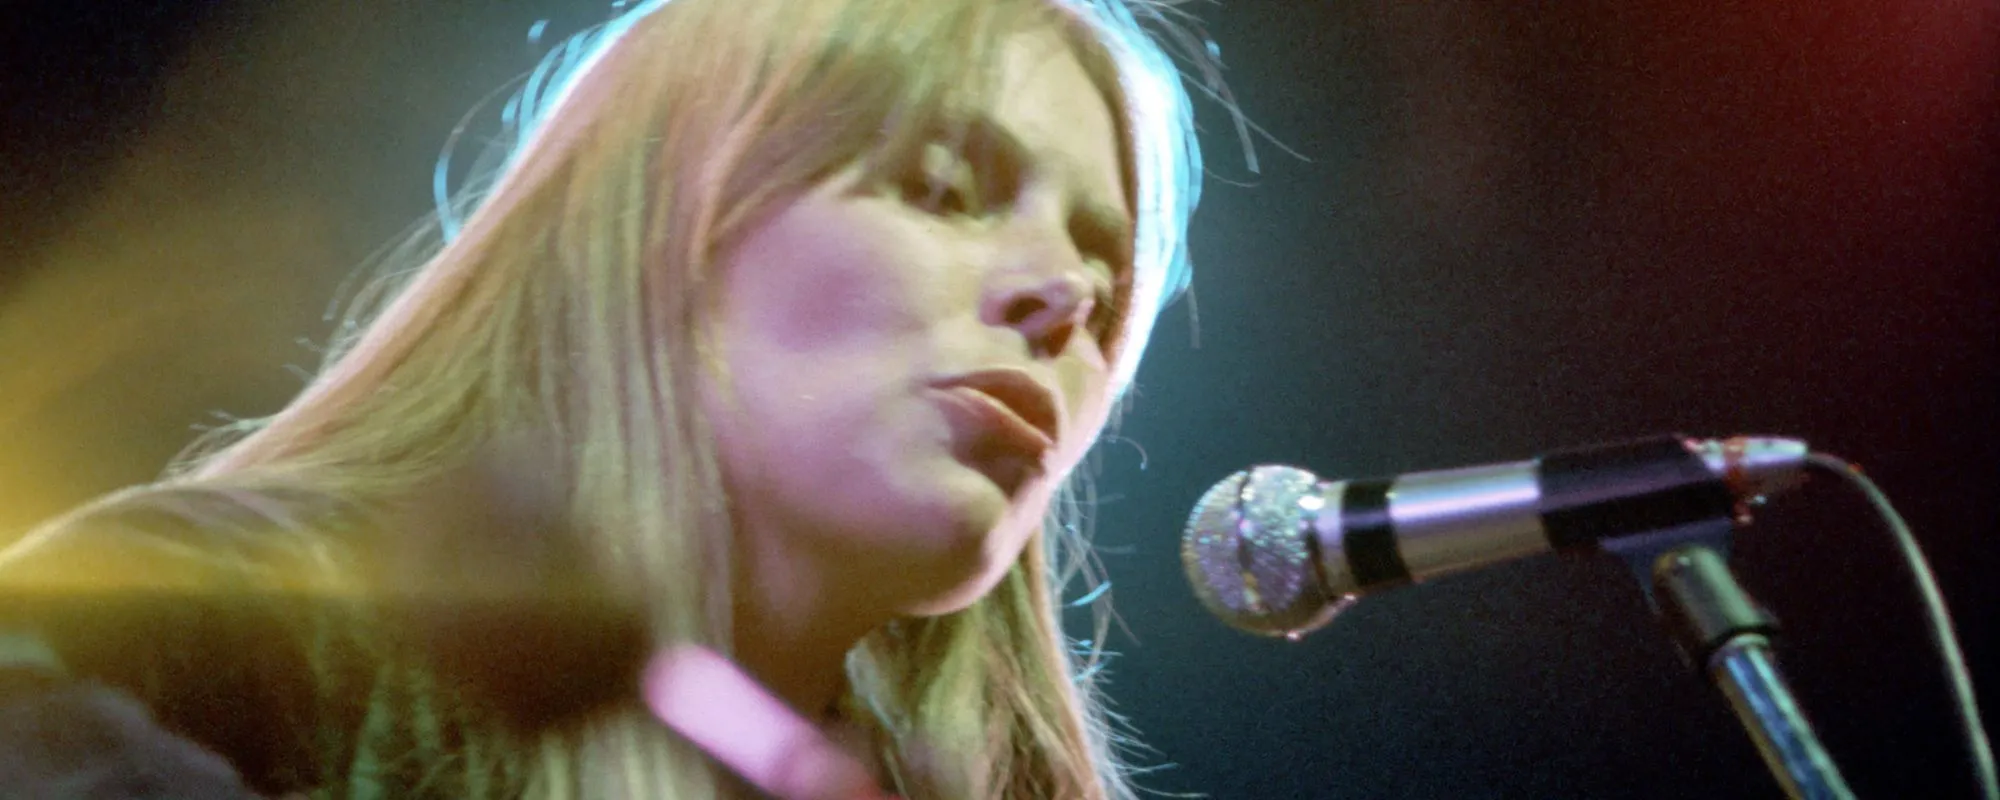 3 Joni Mitchell Songs that Will Make Any Listener Tear Up